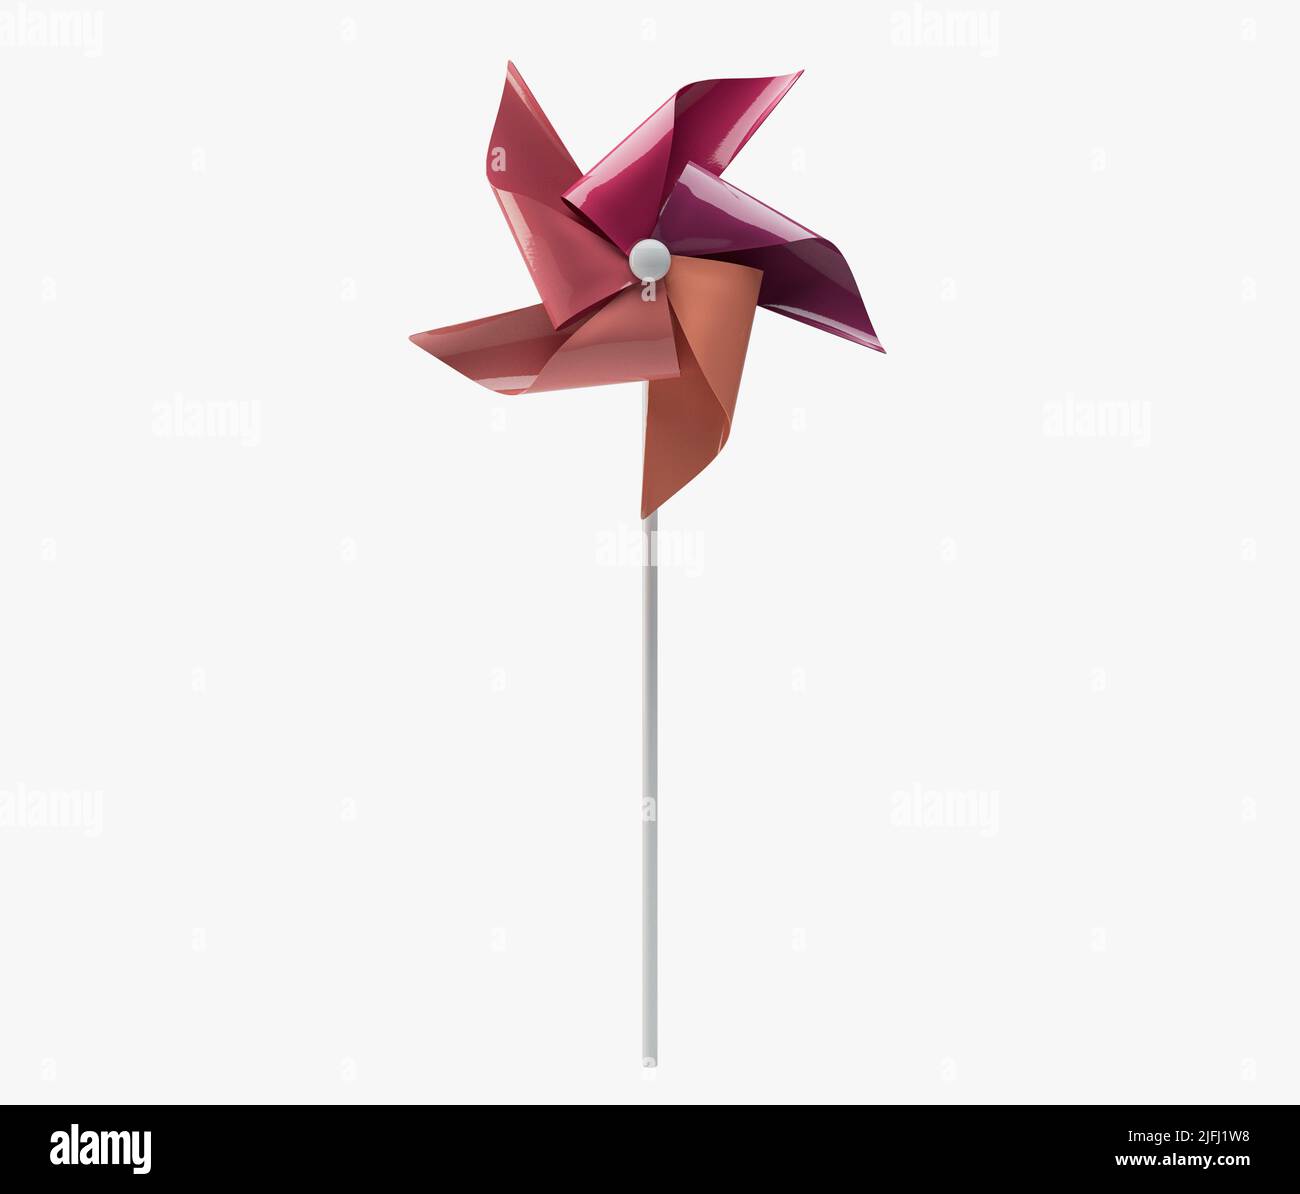 A regular toy pinwheel windmill with colored plastic vanes on a stick on an isolated background - 3D render Stock Photo